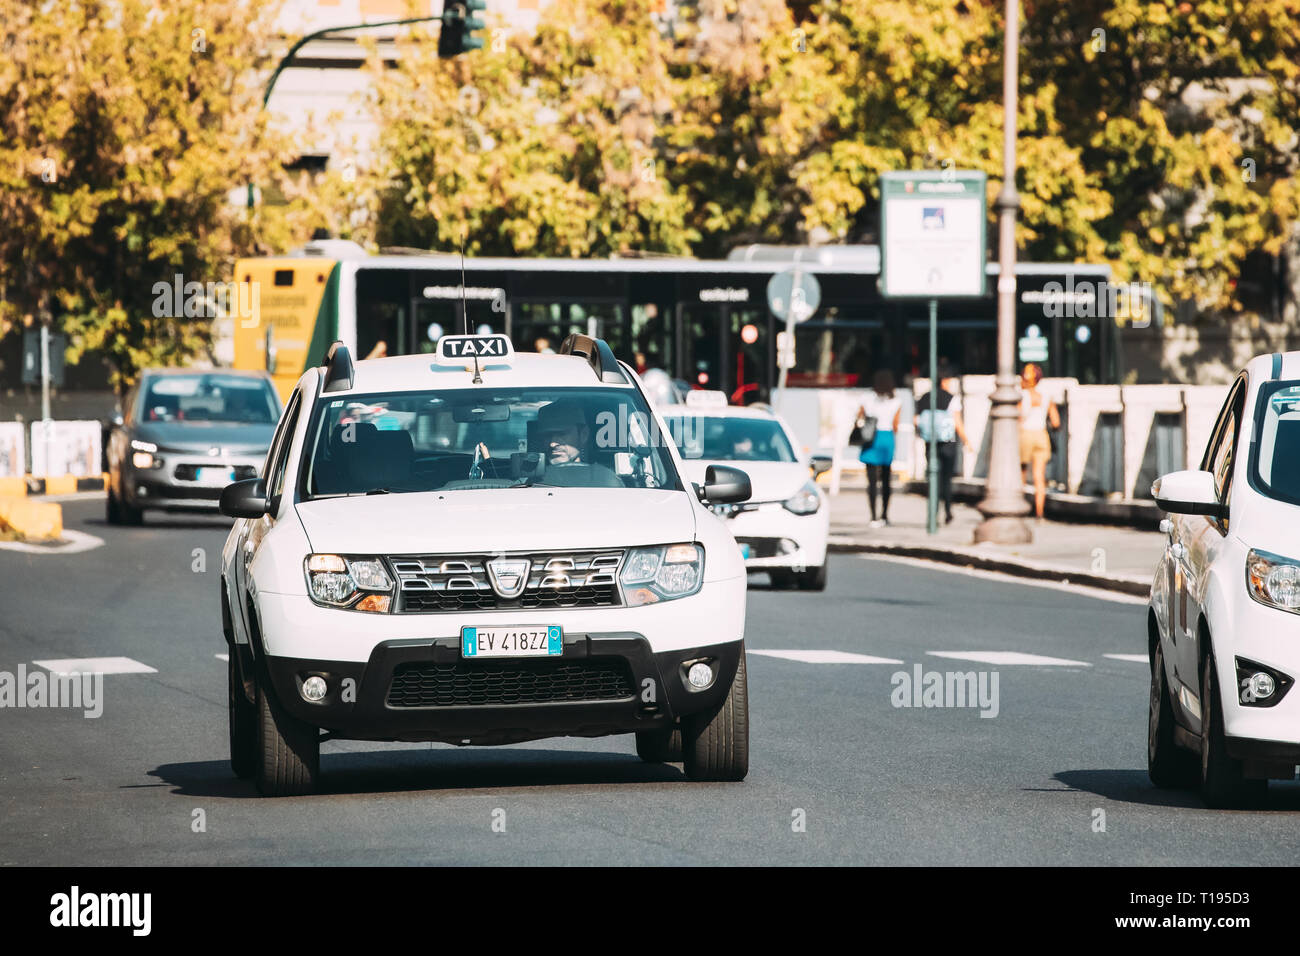 Rome, Italy - October 20, 2018: Taxi Car Dacia Duster SUV In Summer City Street. Duster produced jointly by the French manufacturer Renault and its Ro Stock Photo